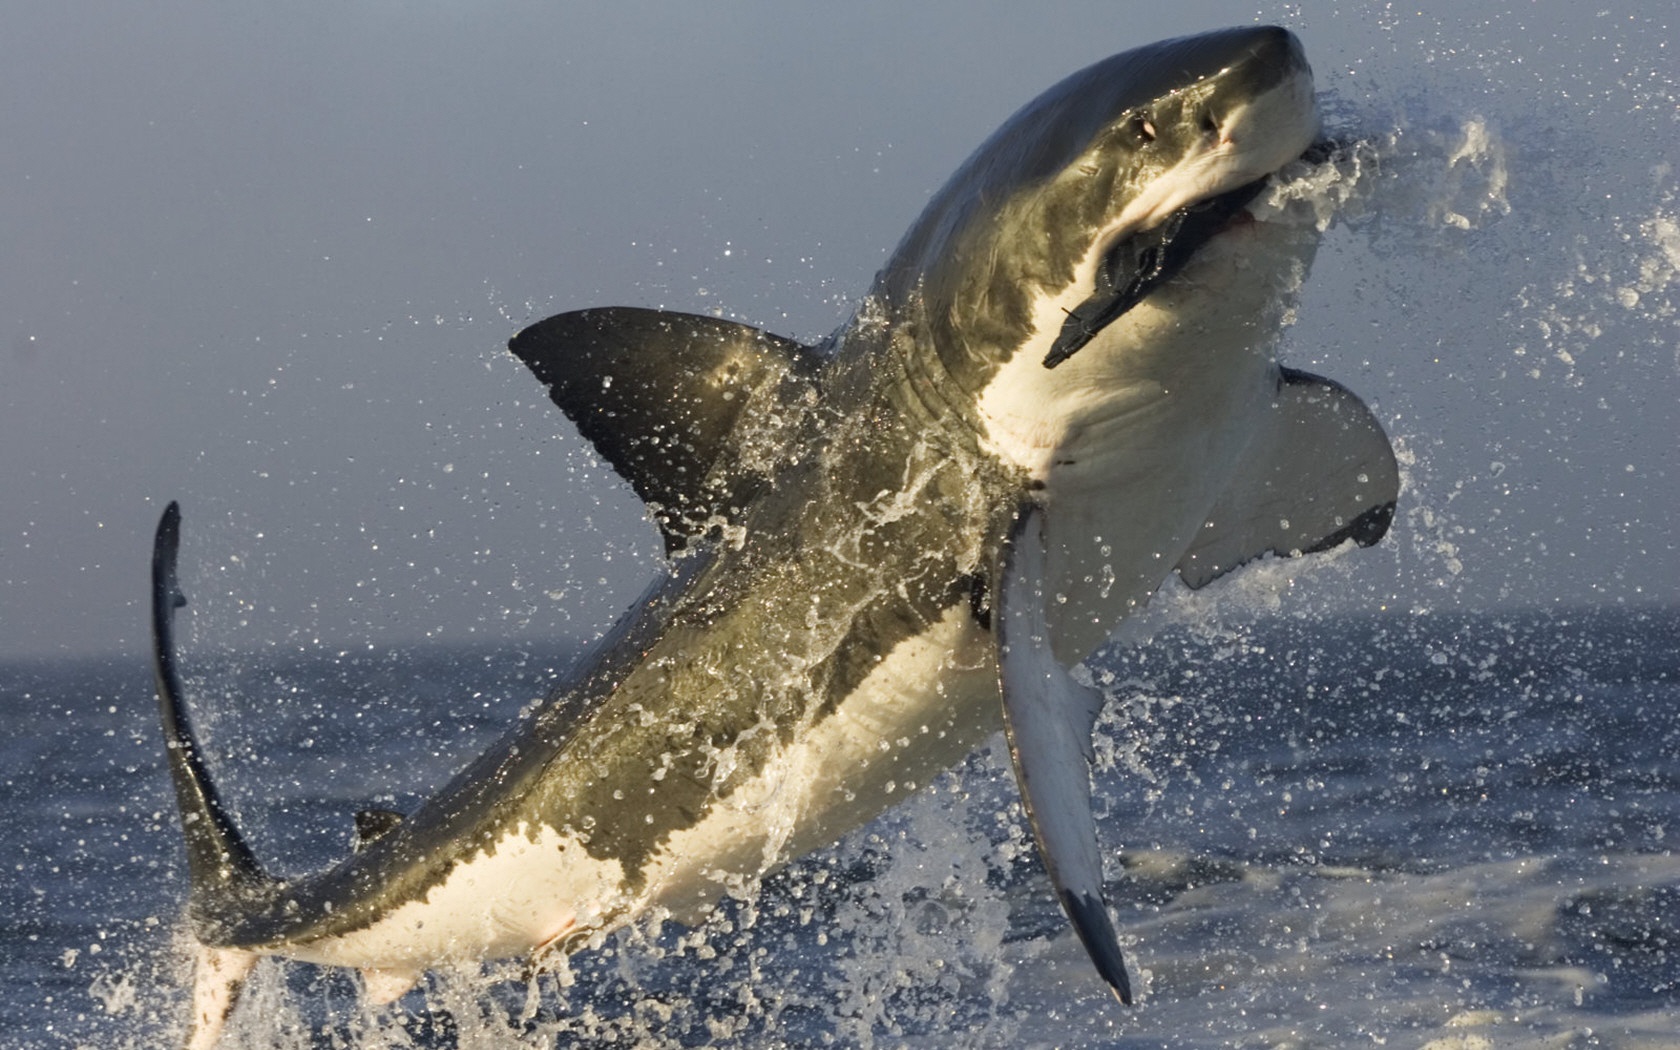 Great White Shark Jumping Out of Water